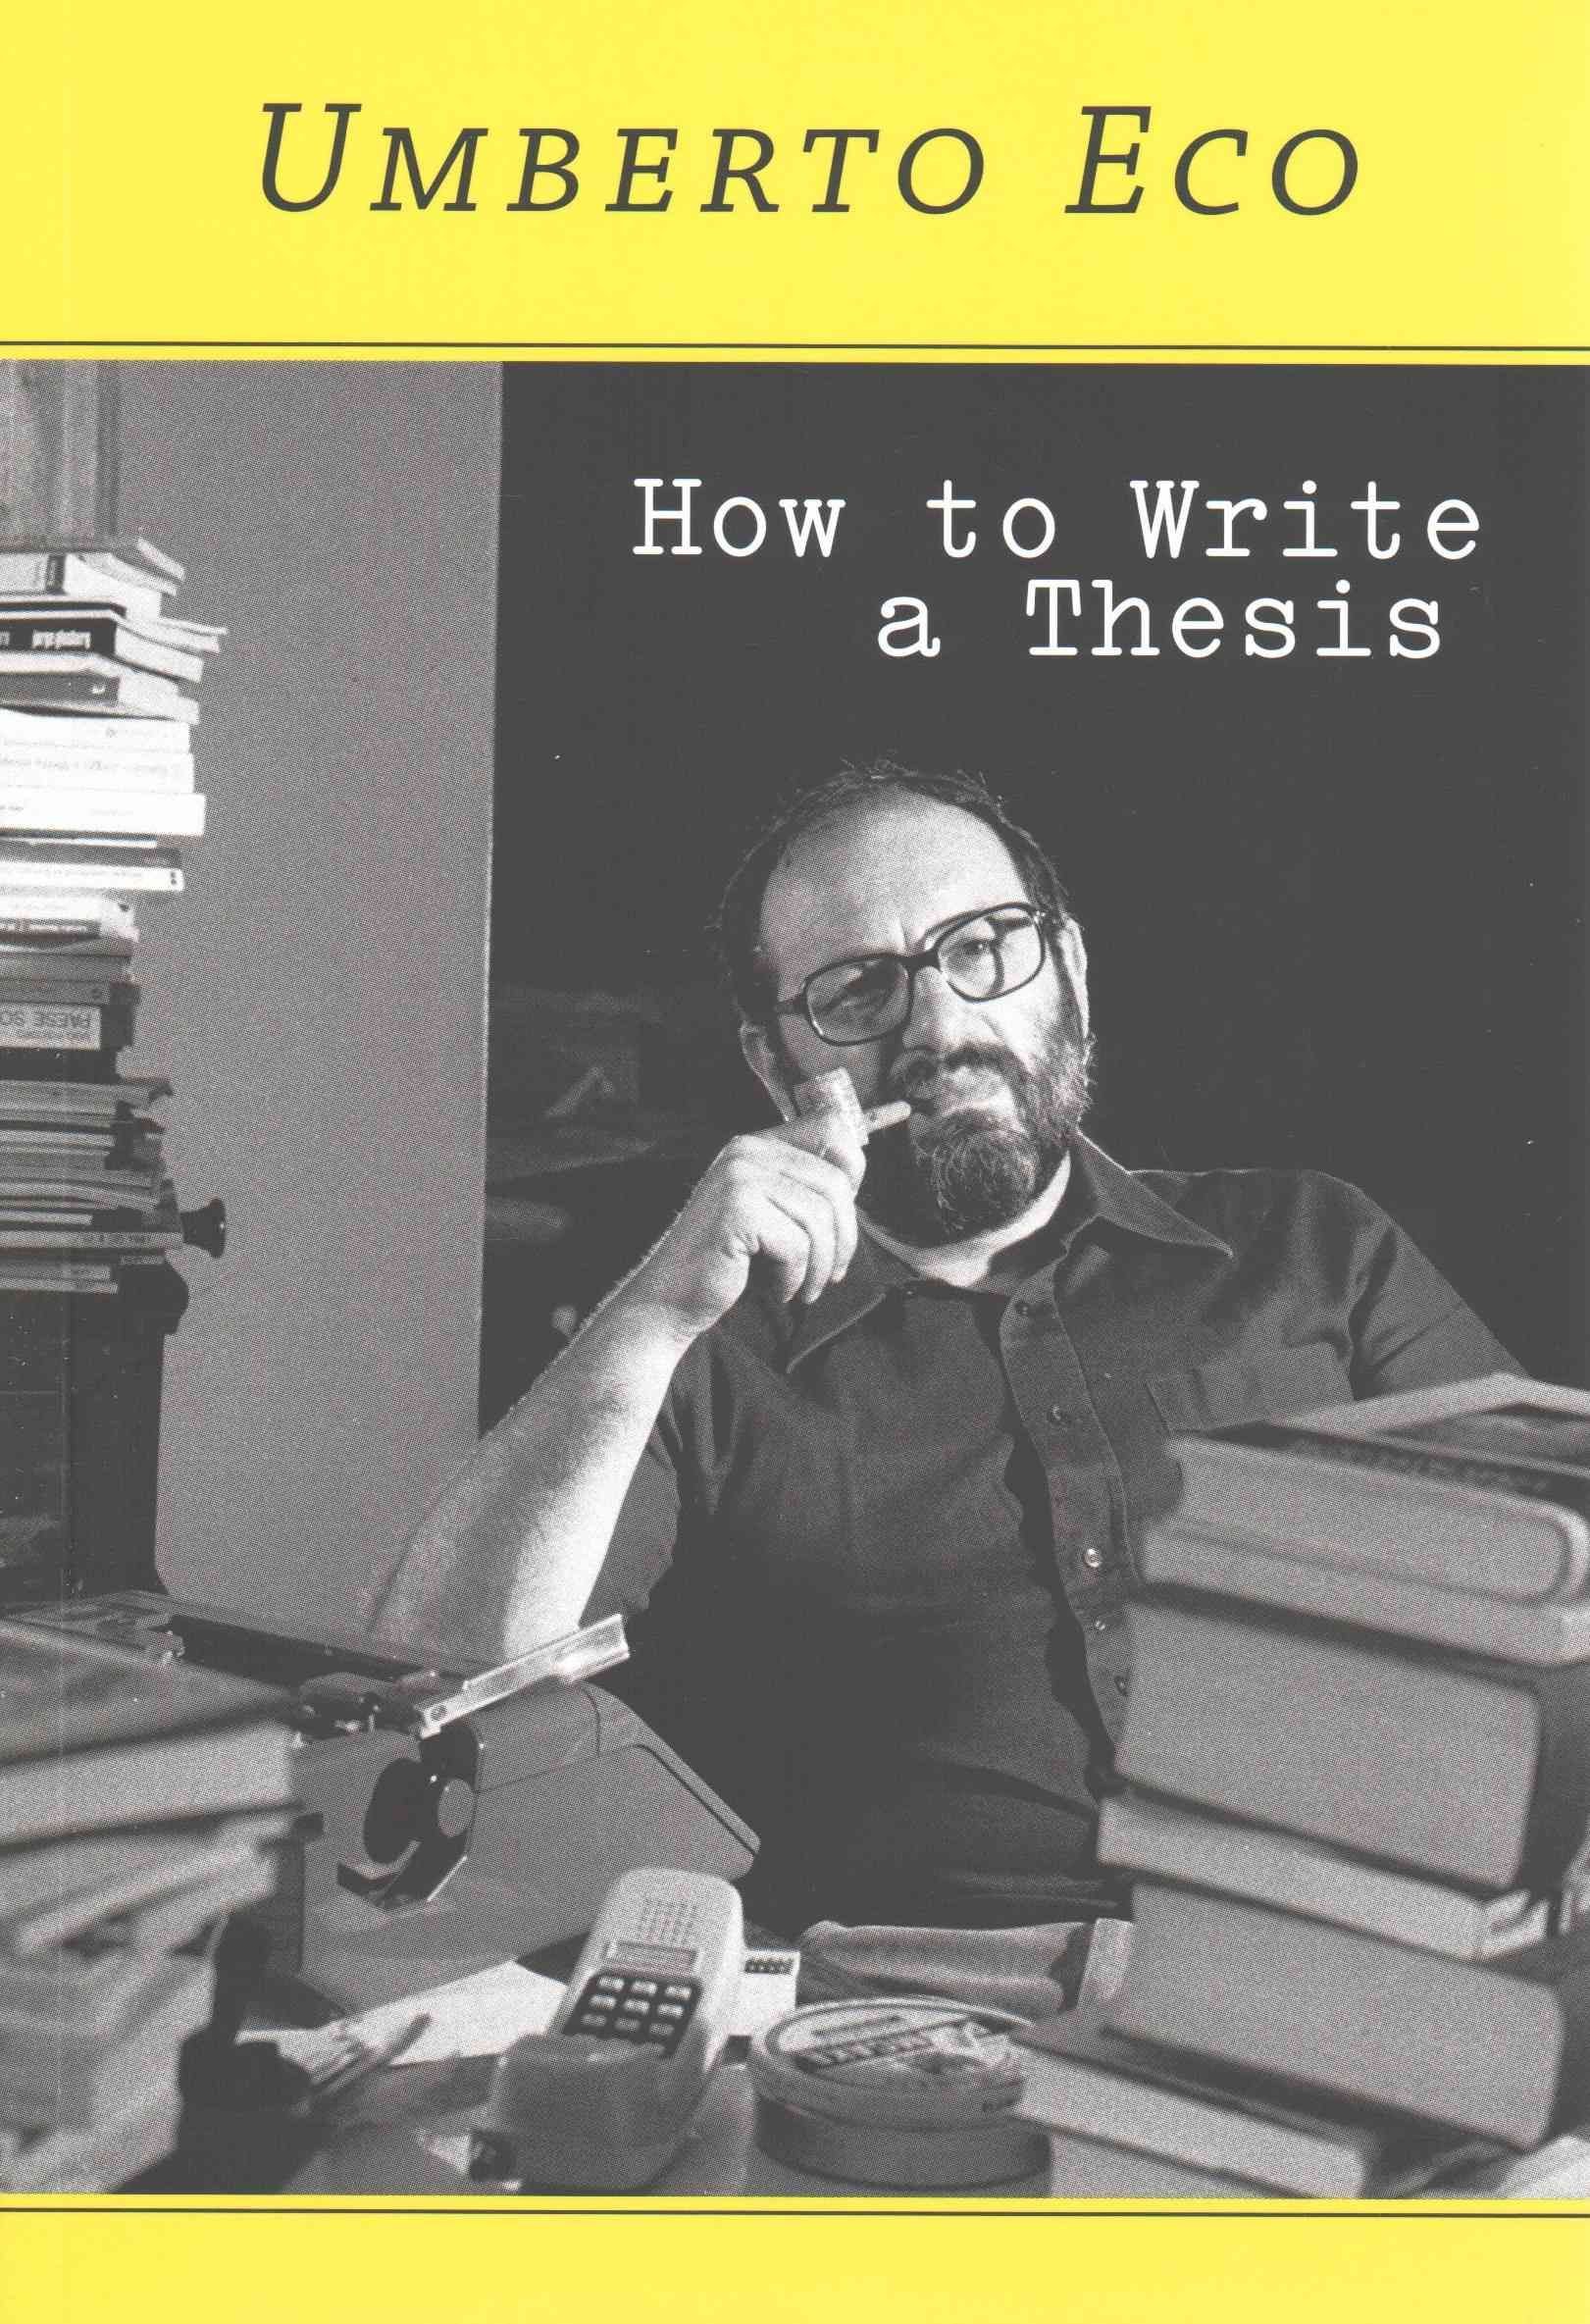 How to Write a Thesis by Umberto Eco and Caterina Mongiat Farina (Paperback)